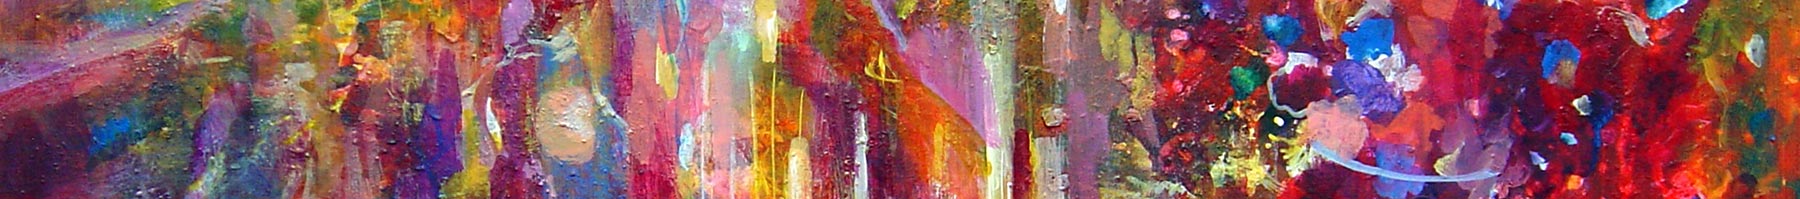 colorful impressionistic painting